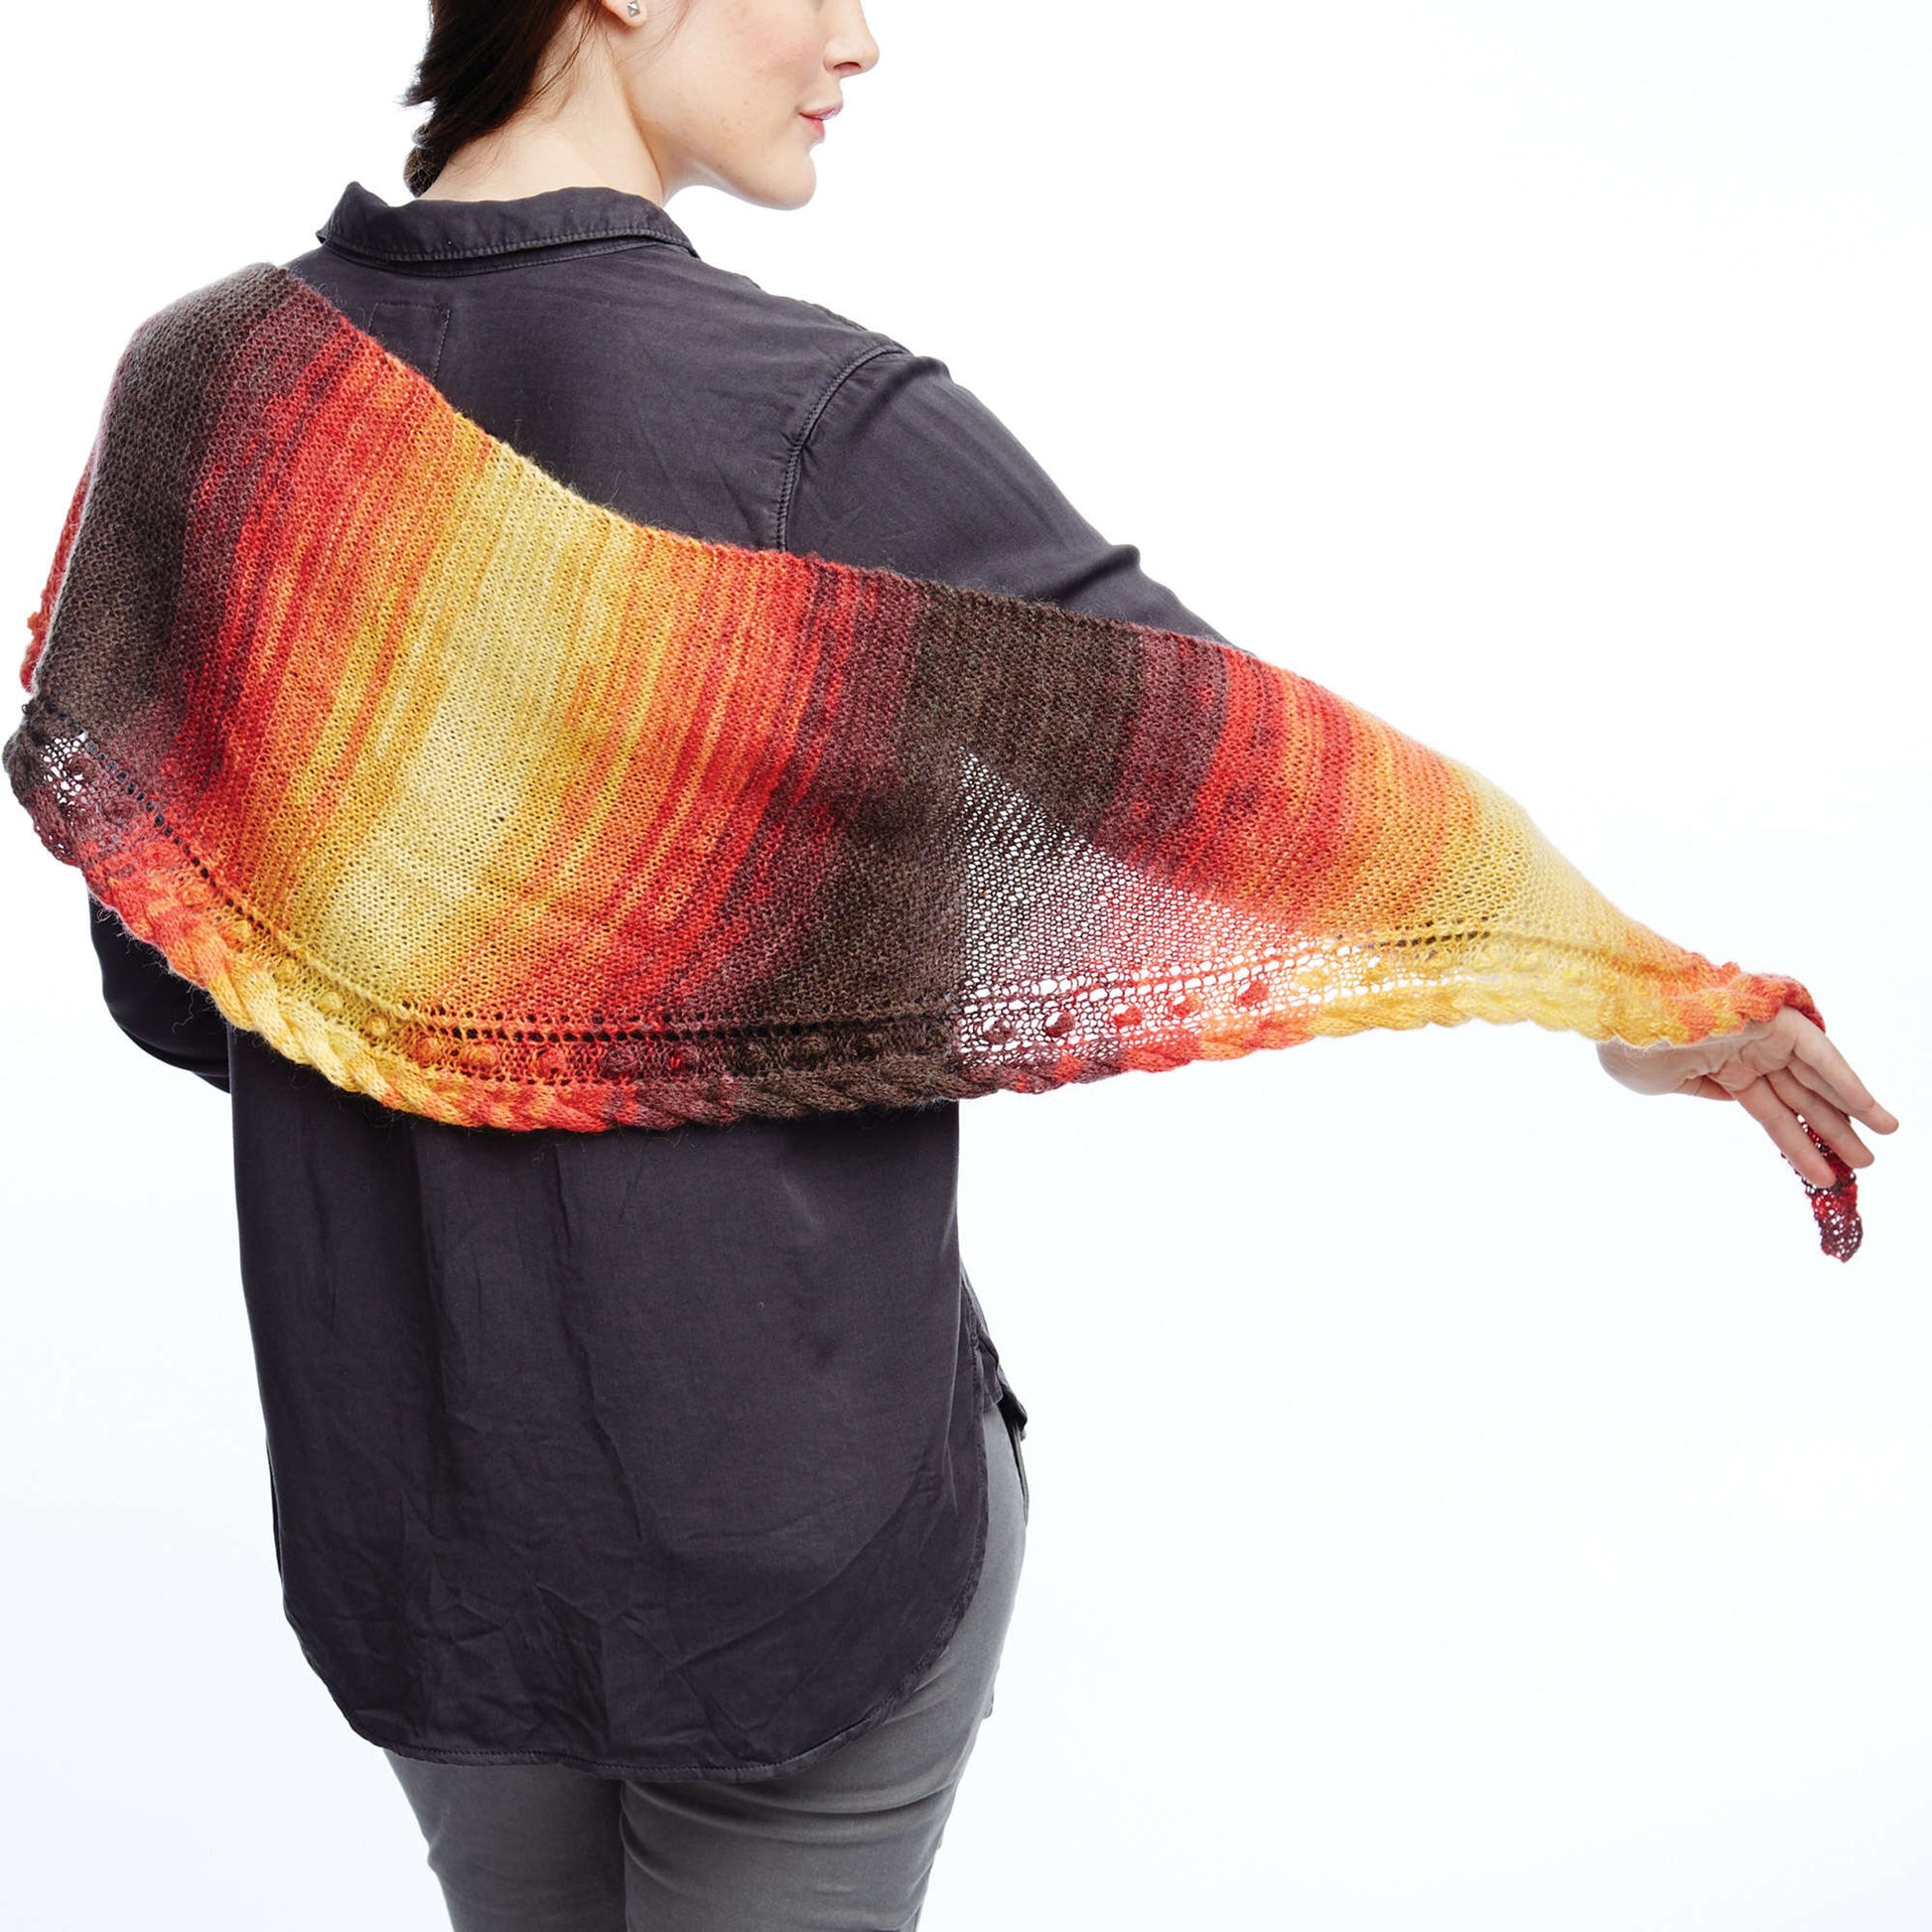 Free Patons Knit Edge Of The Wedge Shawl Pattern